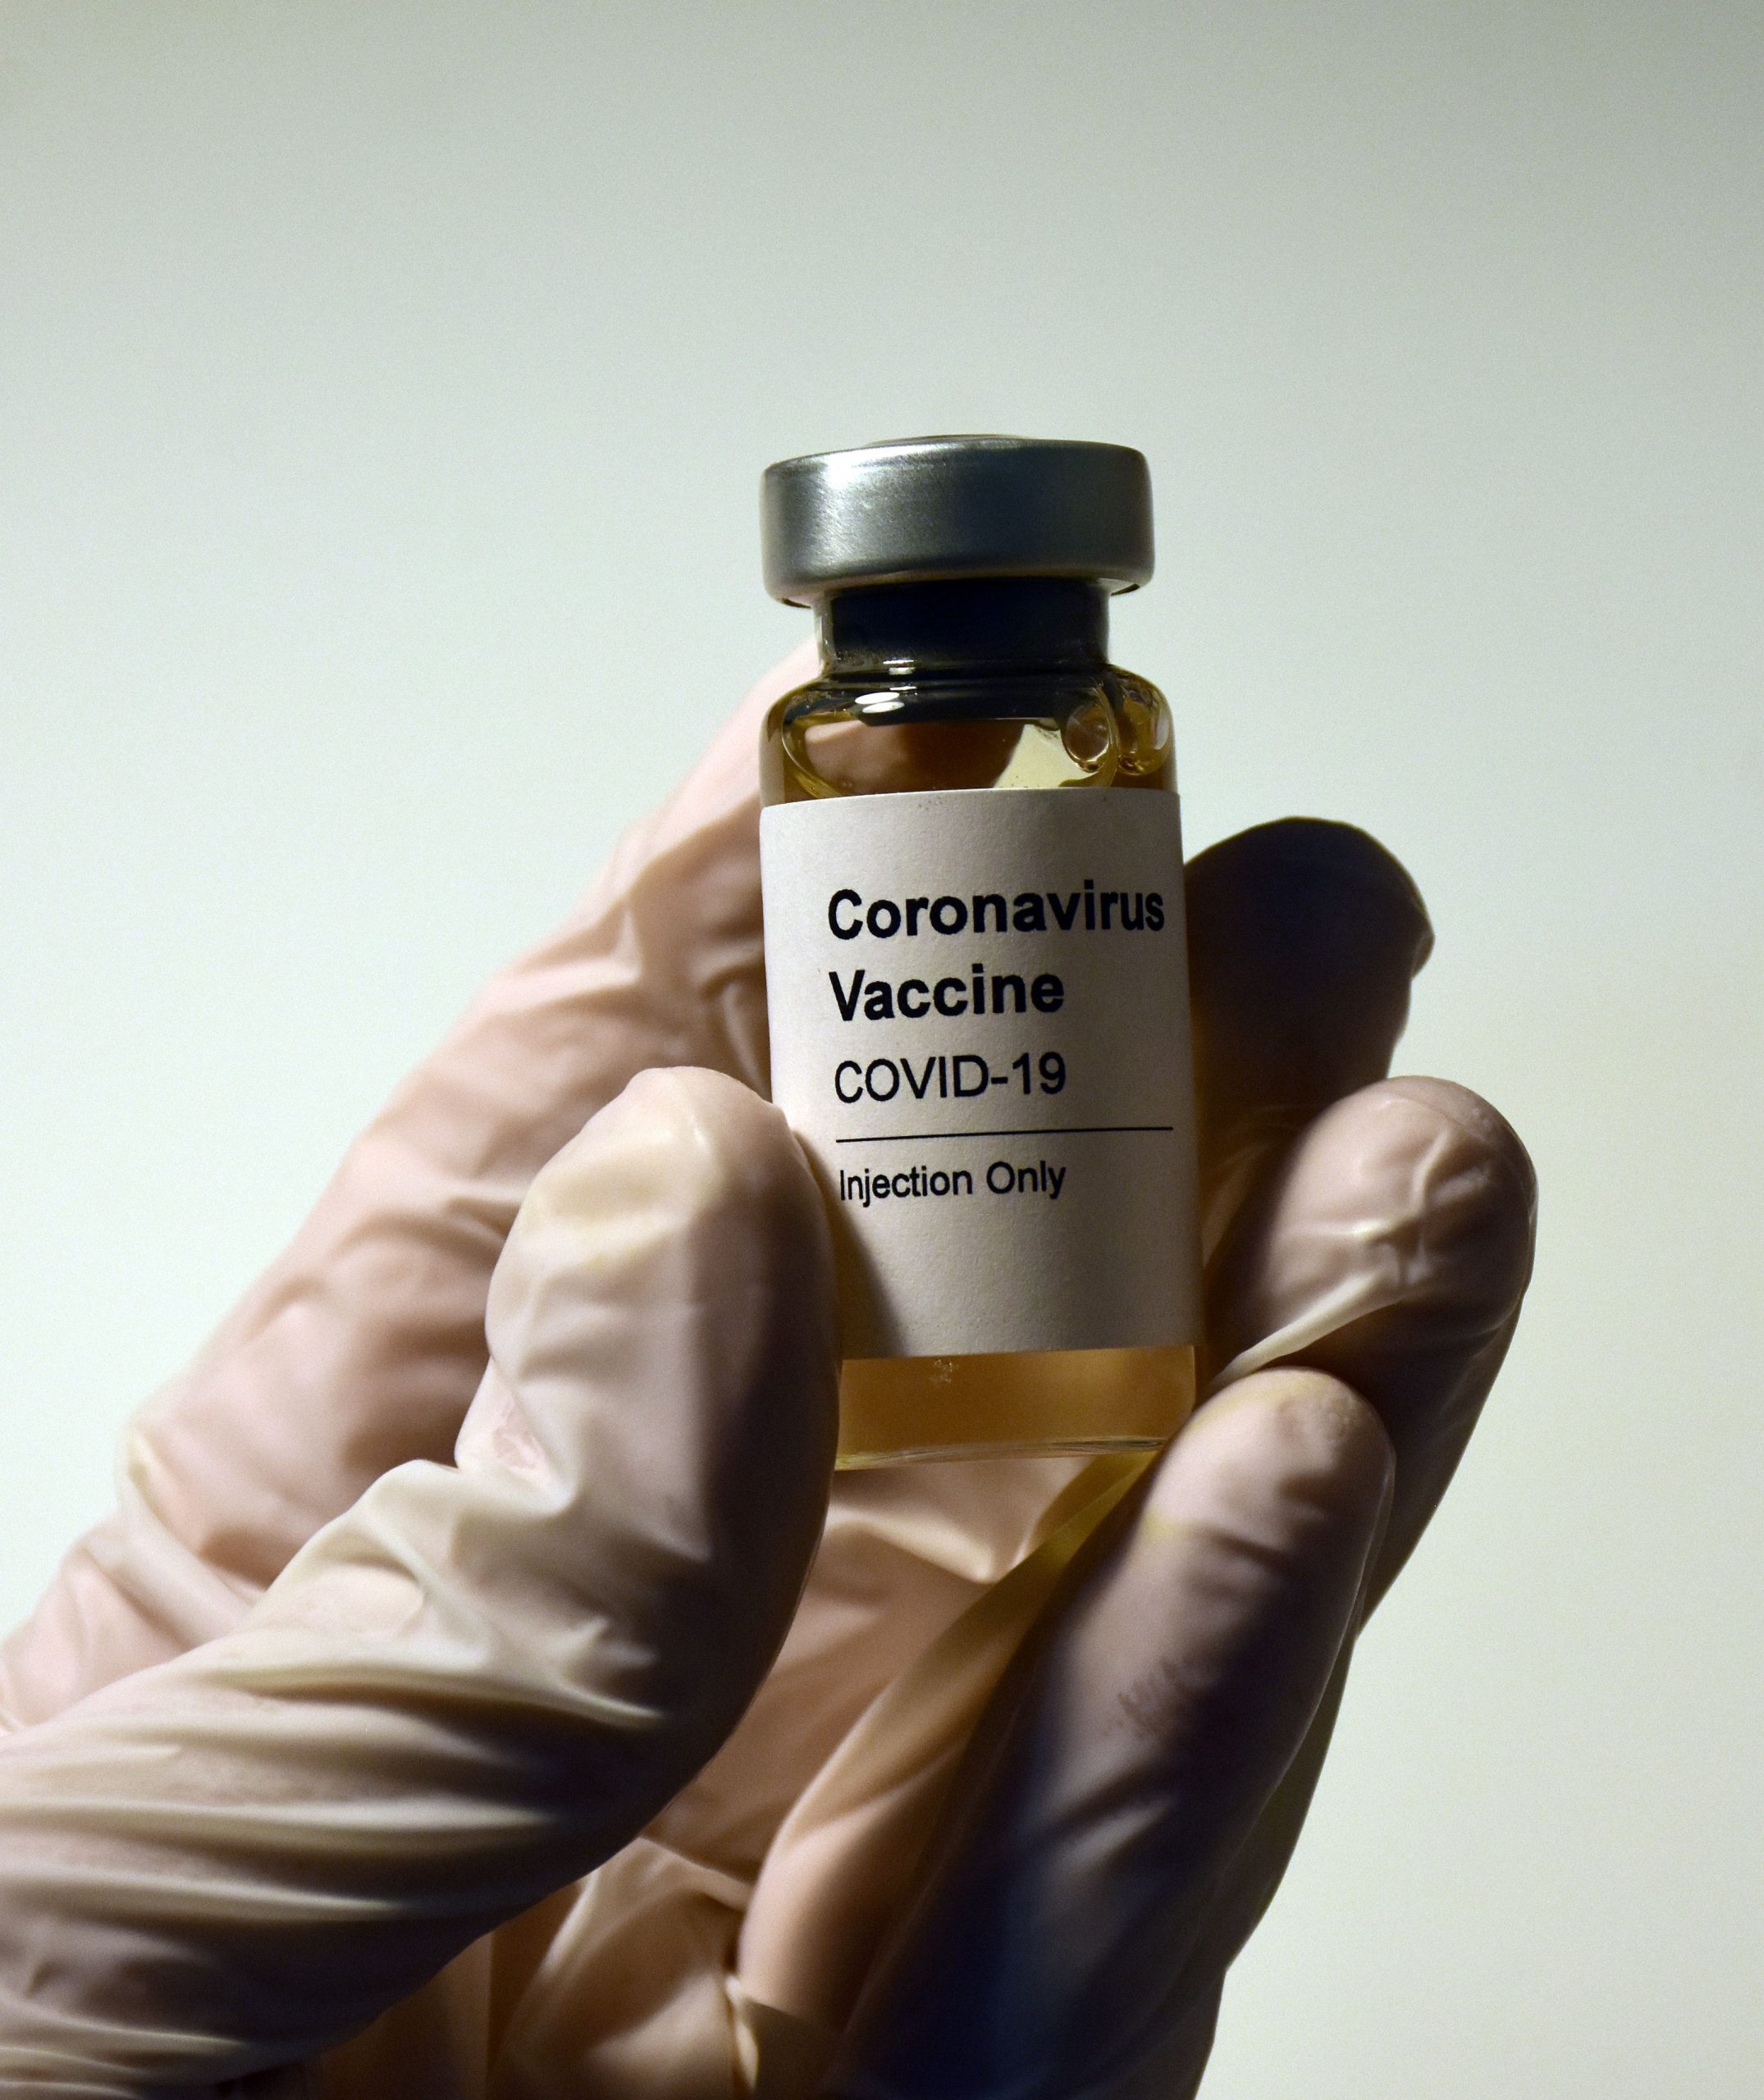 Oregon to mandate vaccines for K-12 school staff, says Governor Kate Brown